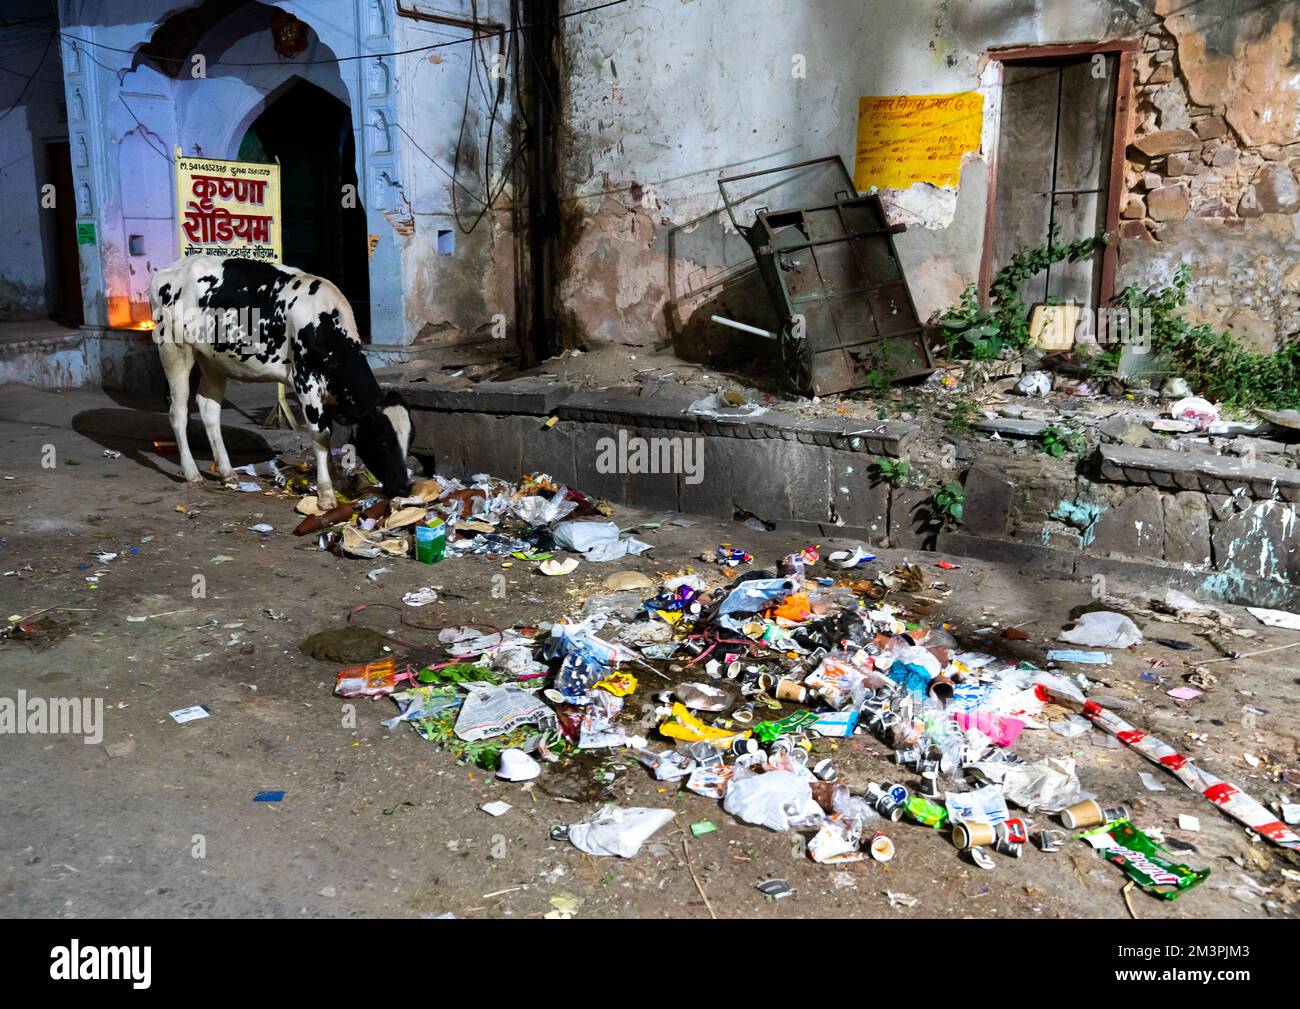 Cow eating garbages in the street, Rajasthan, Jaipur, India Stock Photo